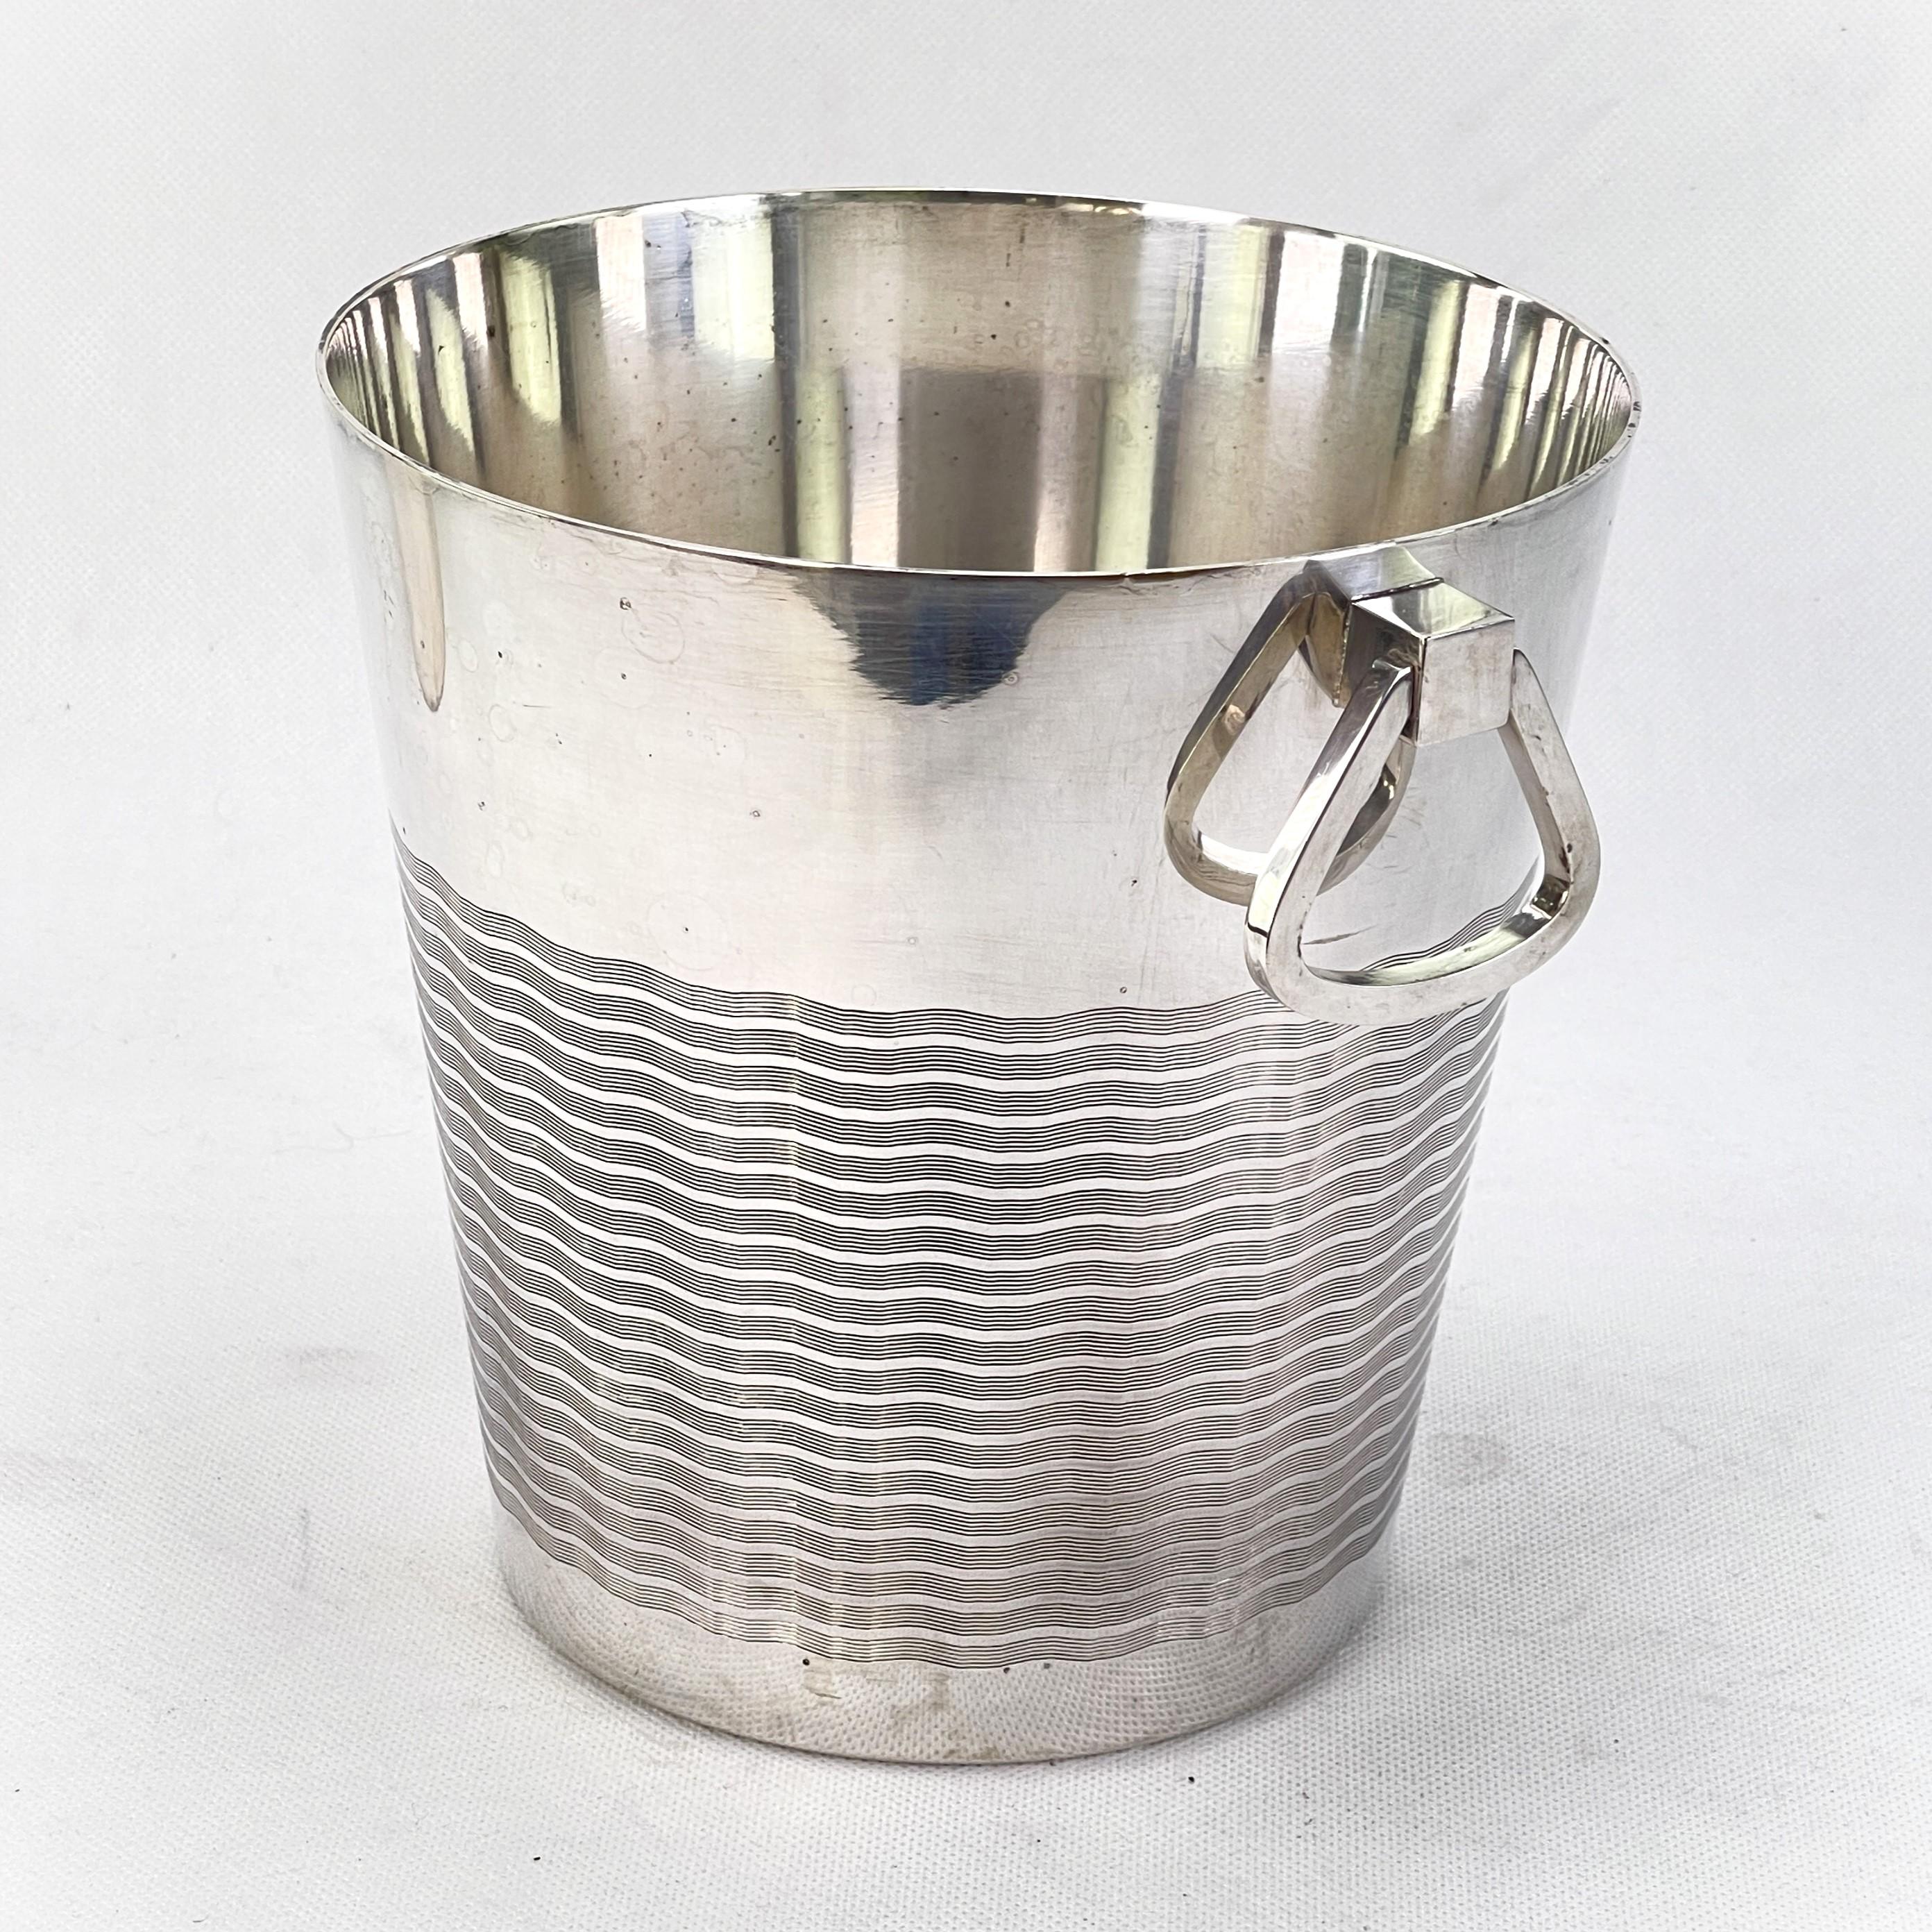 Art Deco Champagne cooler by Saint Médard - 1930s

This beautiful small champagne or ice cooler from the 1930s is in the style of the Streamline Modern Art Deco. This style emphasised curvy streamlined shapes. The wine cooler still captivates with